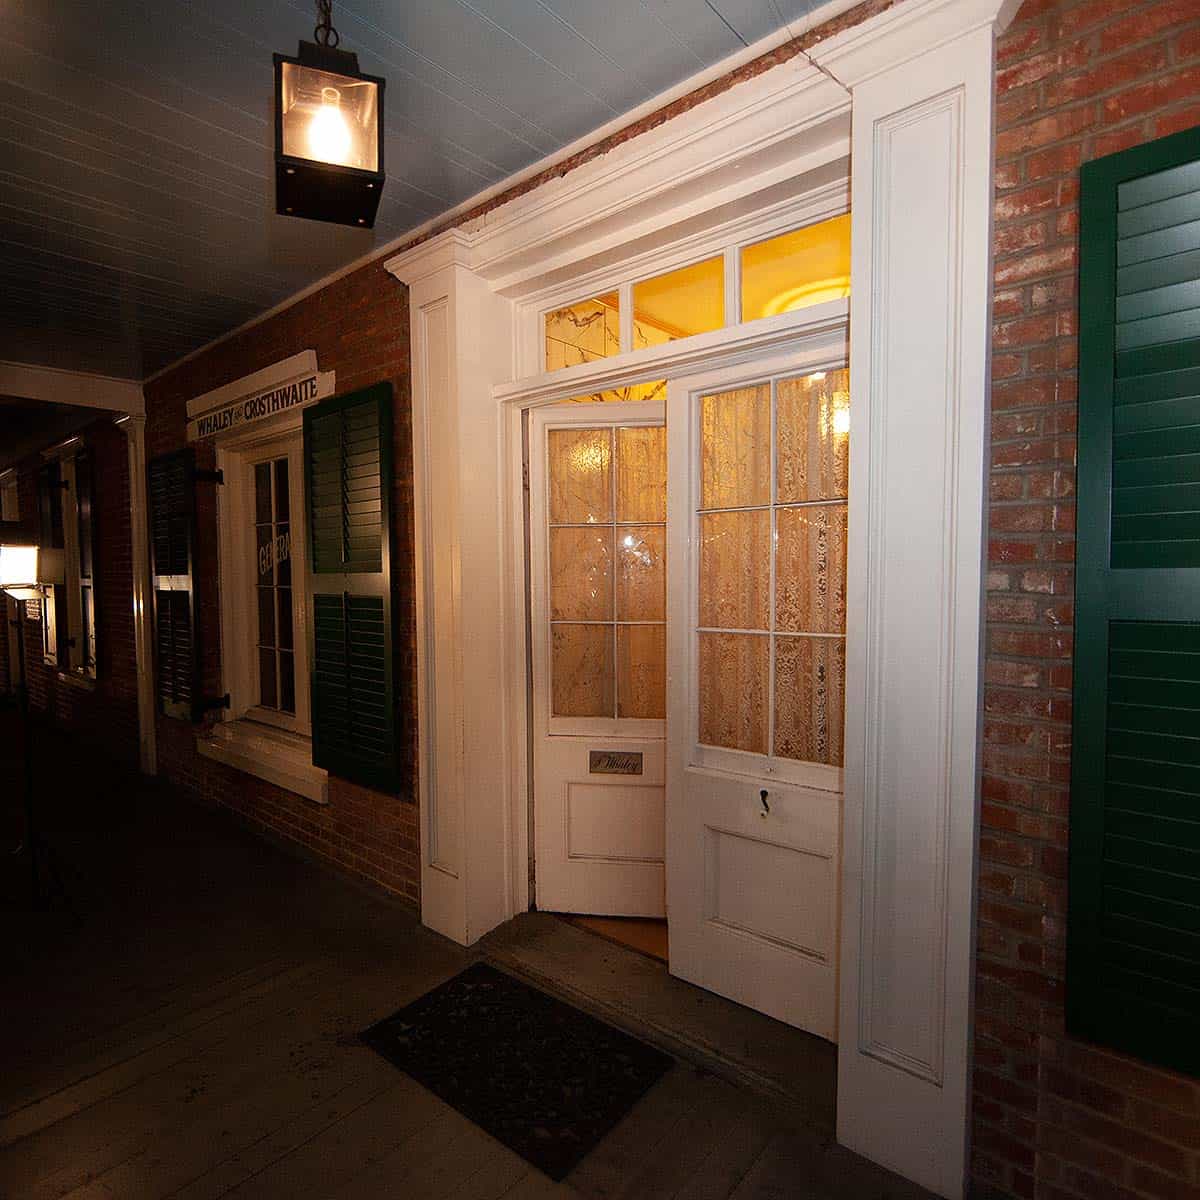 whaley house night tour reviews